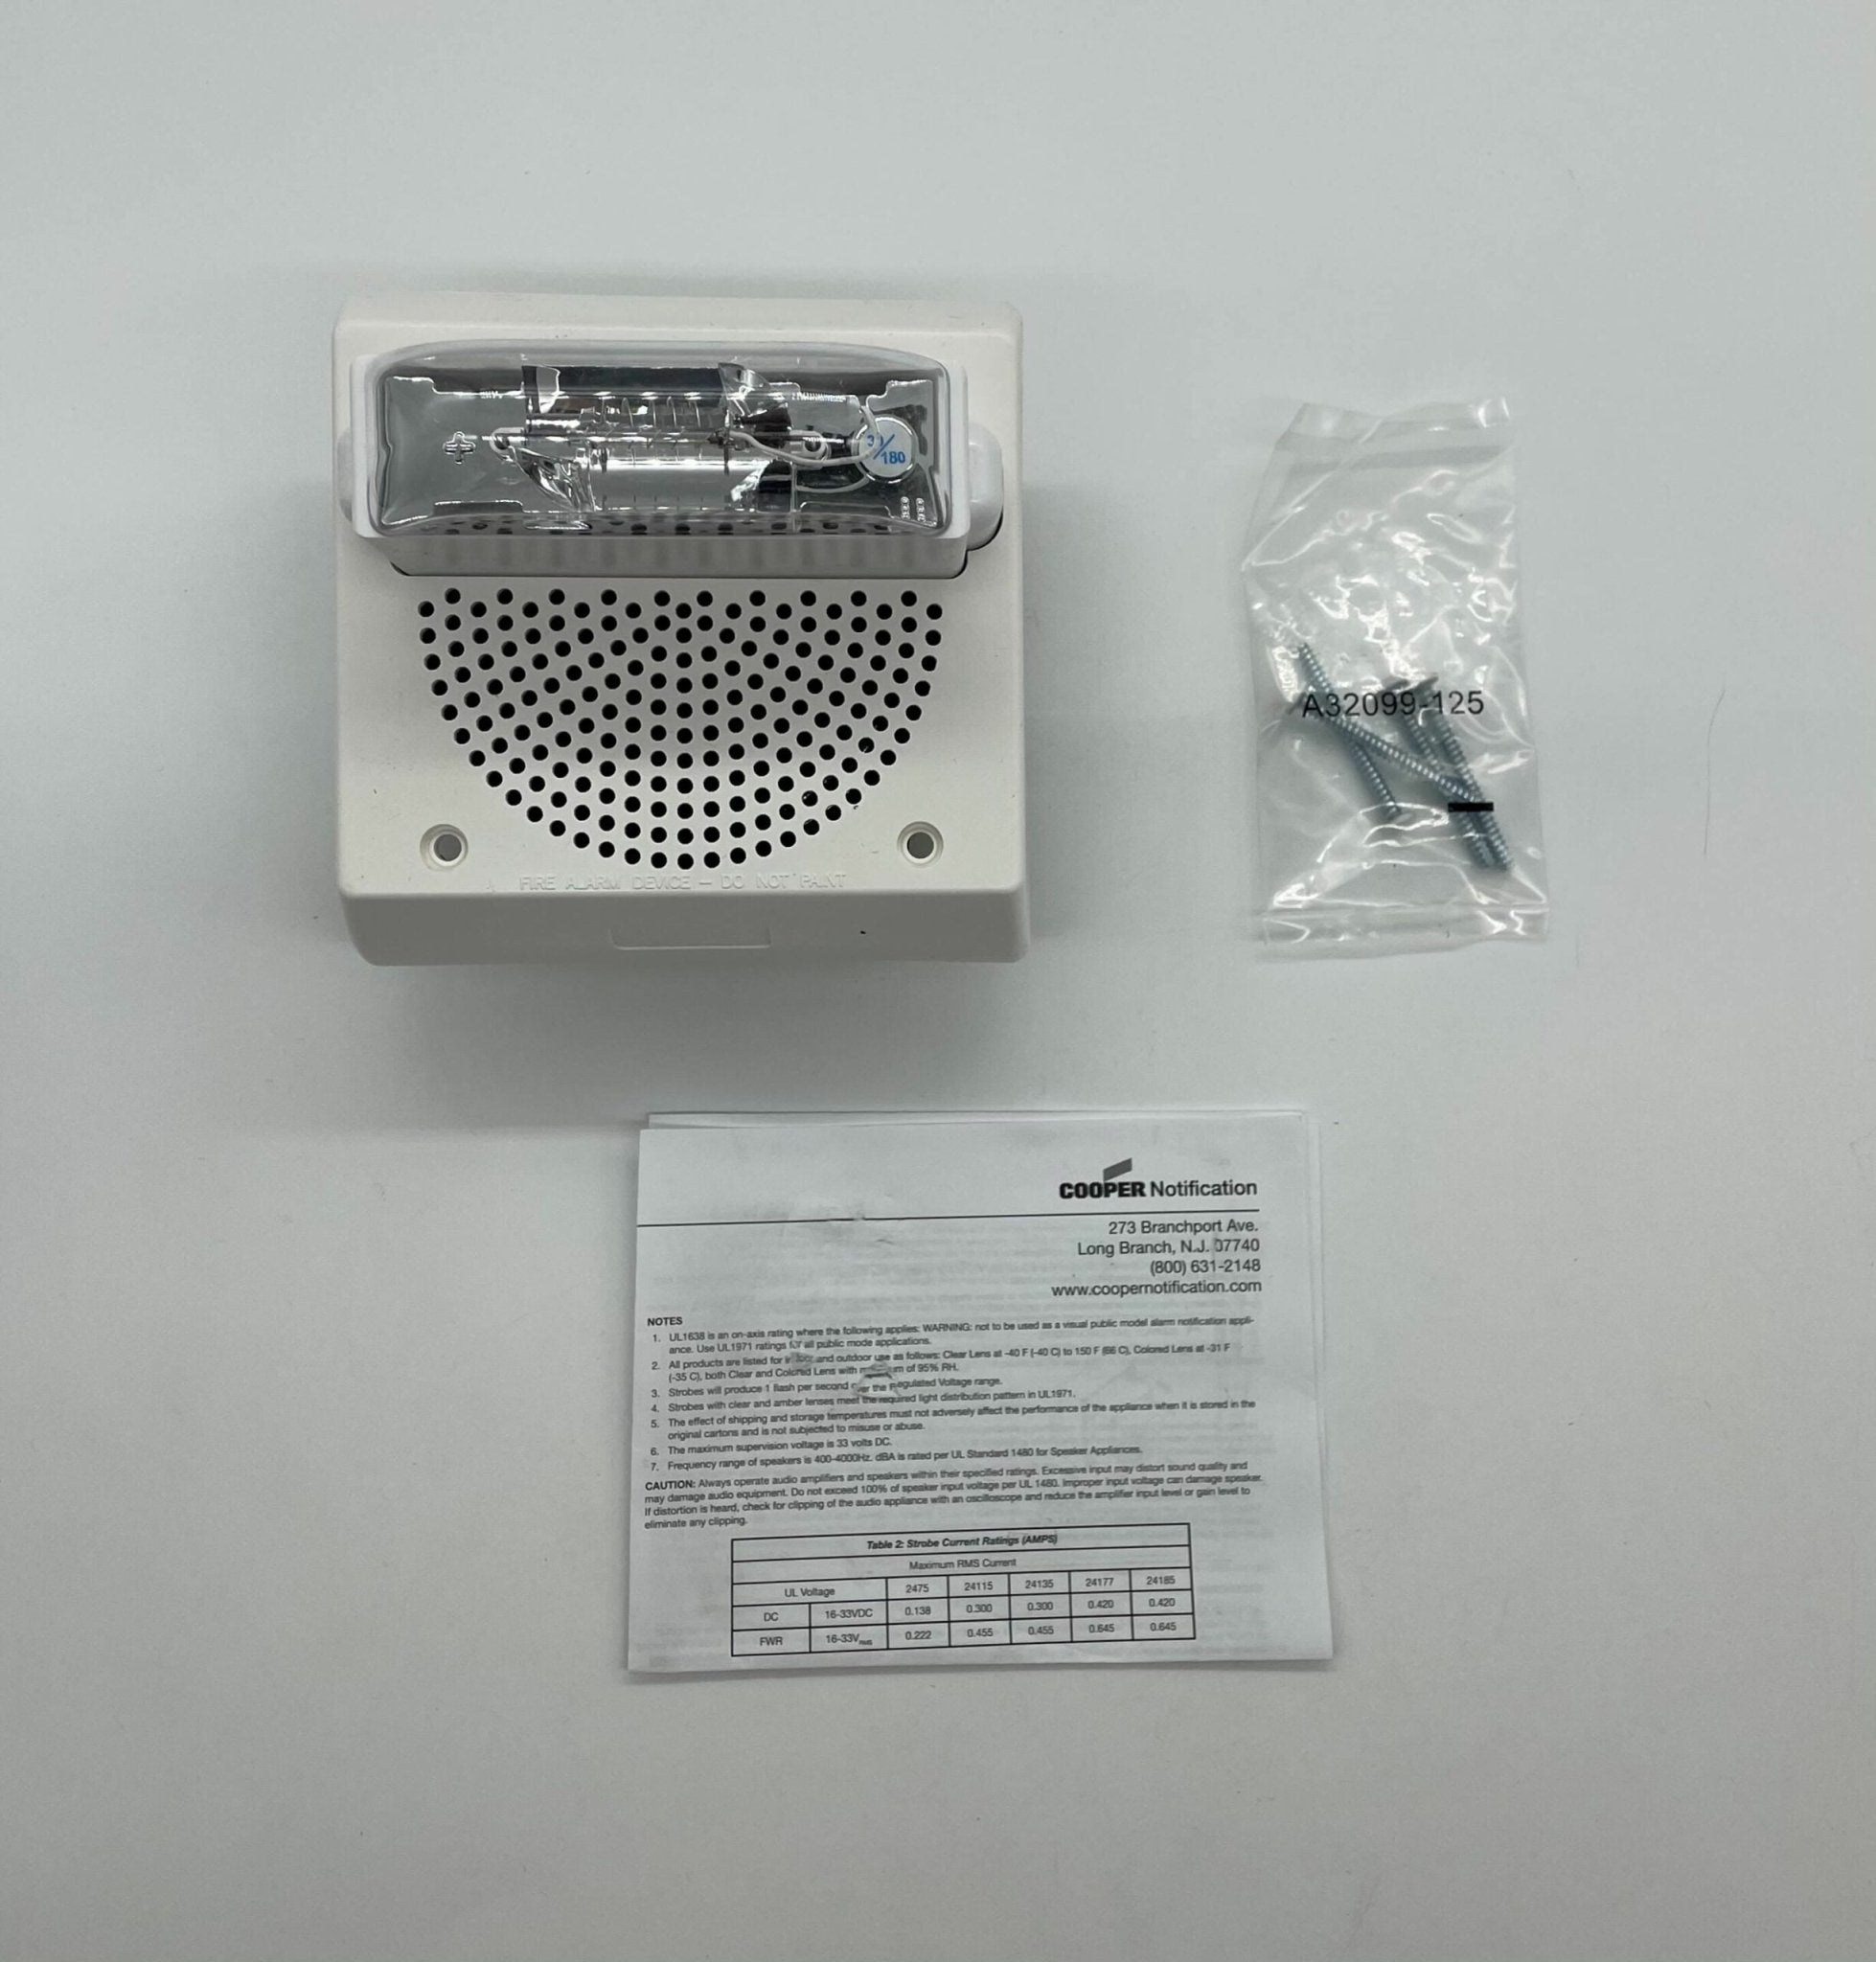 Wheelock ET70WP-2475W-NW - The Fire Alarm Supplier